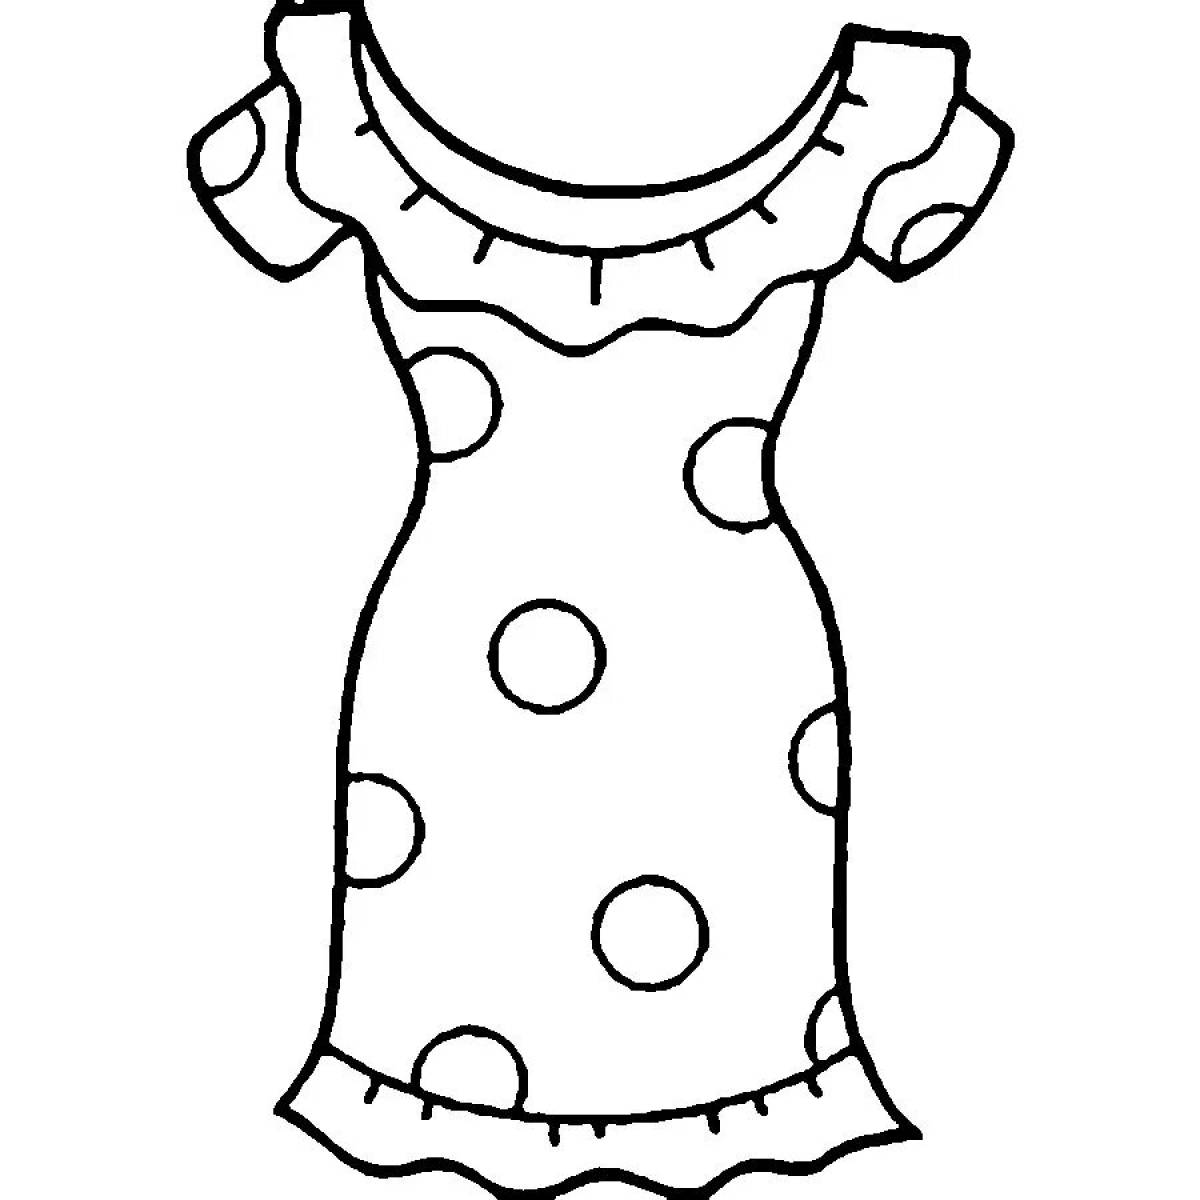 Puffy dress coloring page for children 2-3 years old